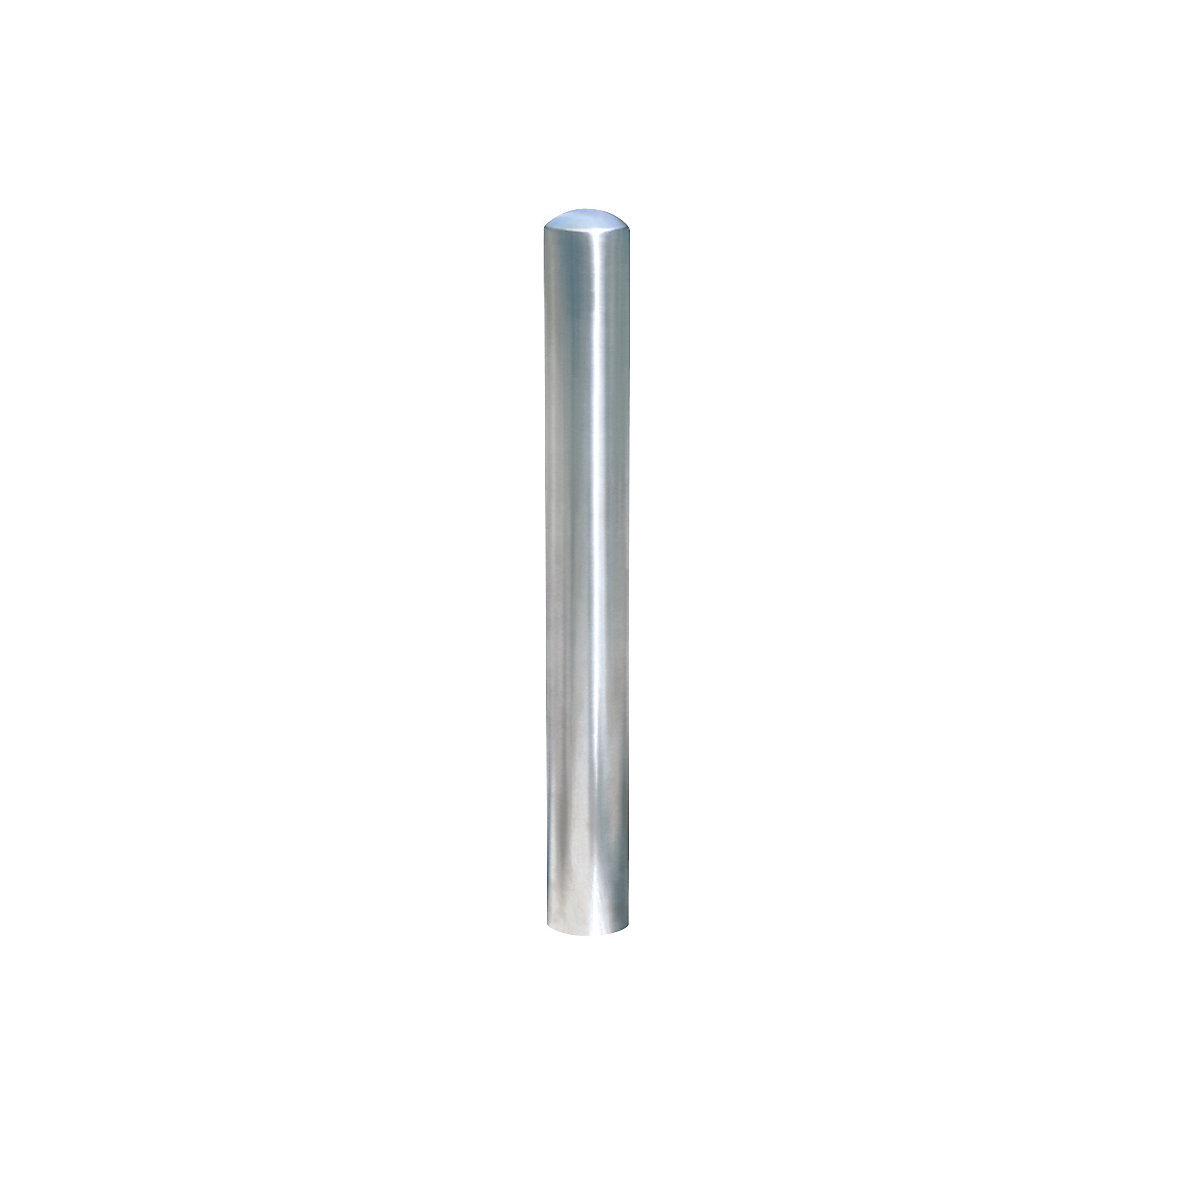 Stainless steel bollard, for concreting in, Ø 108 mm-5